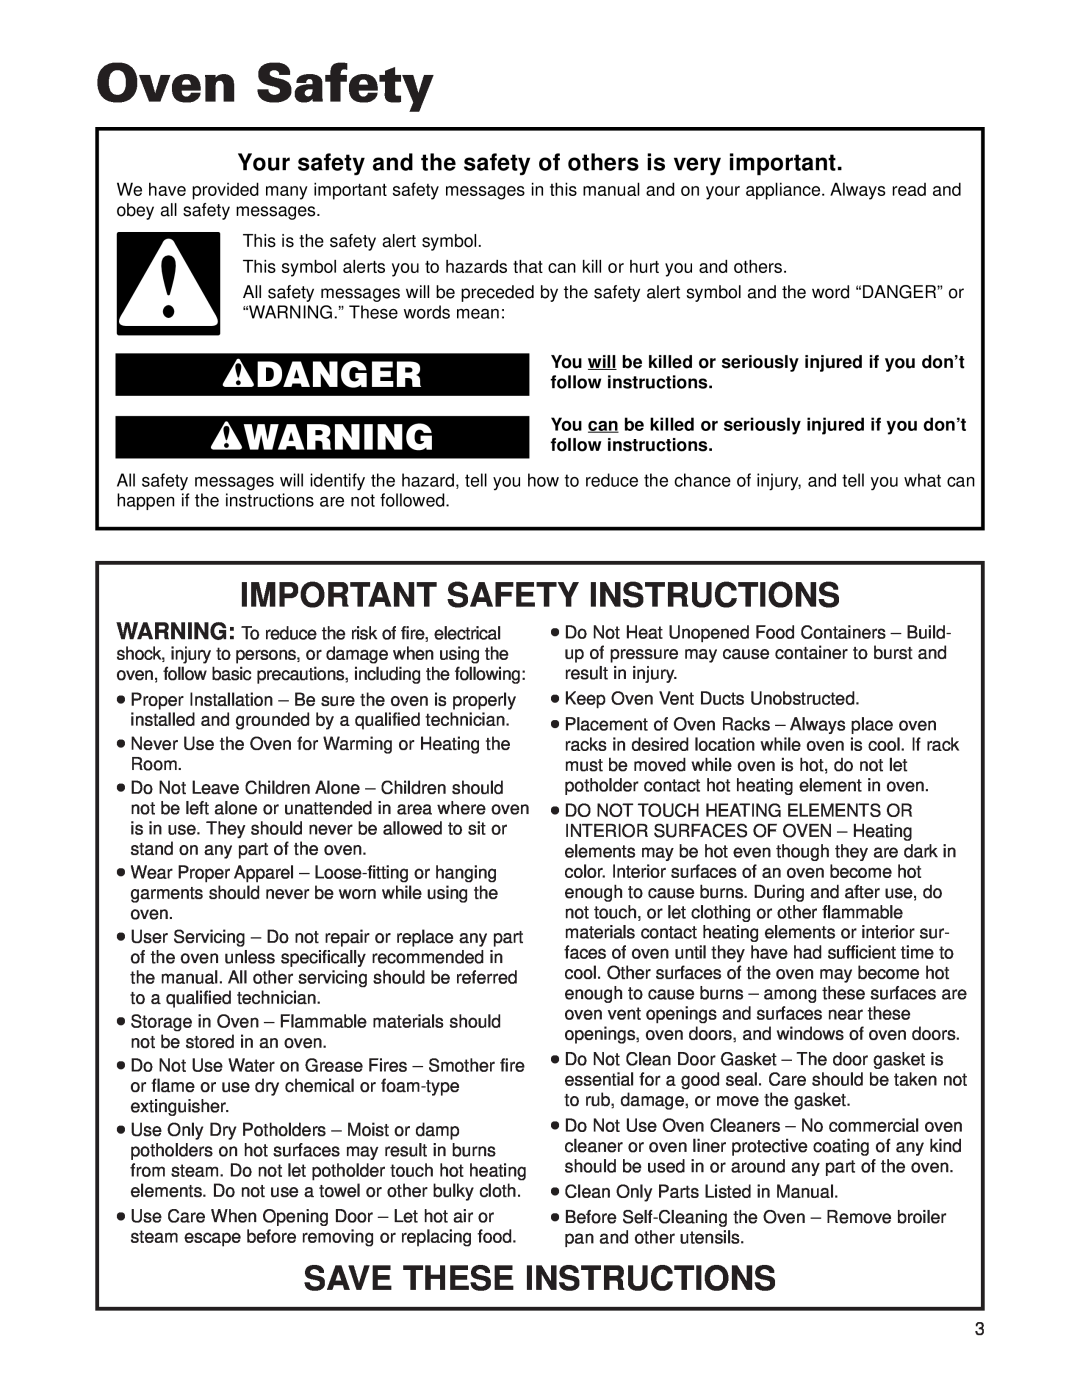 Whirlpool RMC305PD, GMC275PD warranty Oven Safety, wDANGER wWARNING, Important Safety Instructions, Save These Instructions 